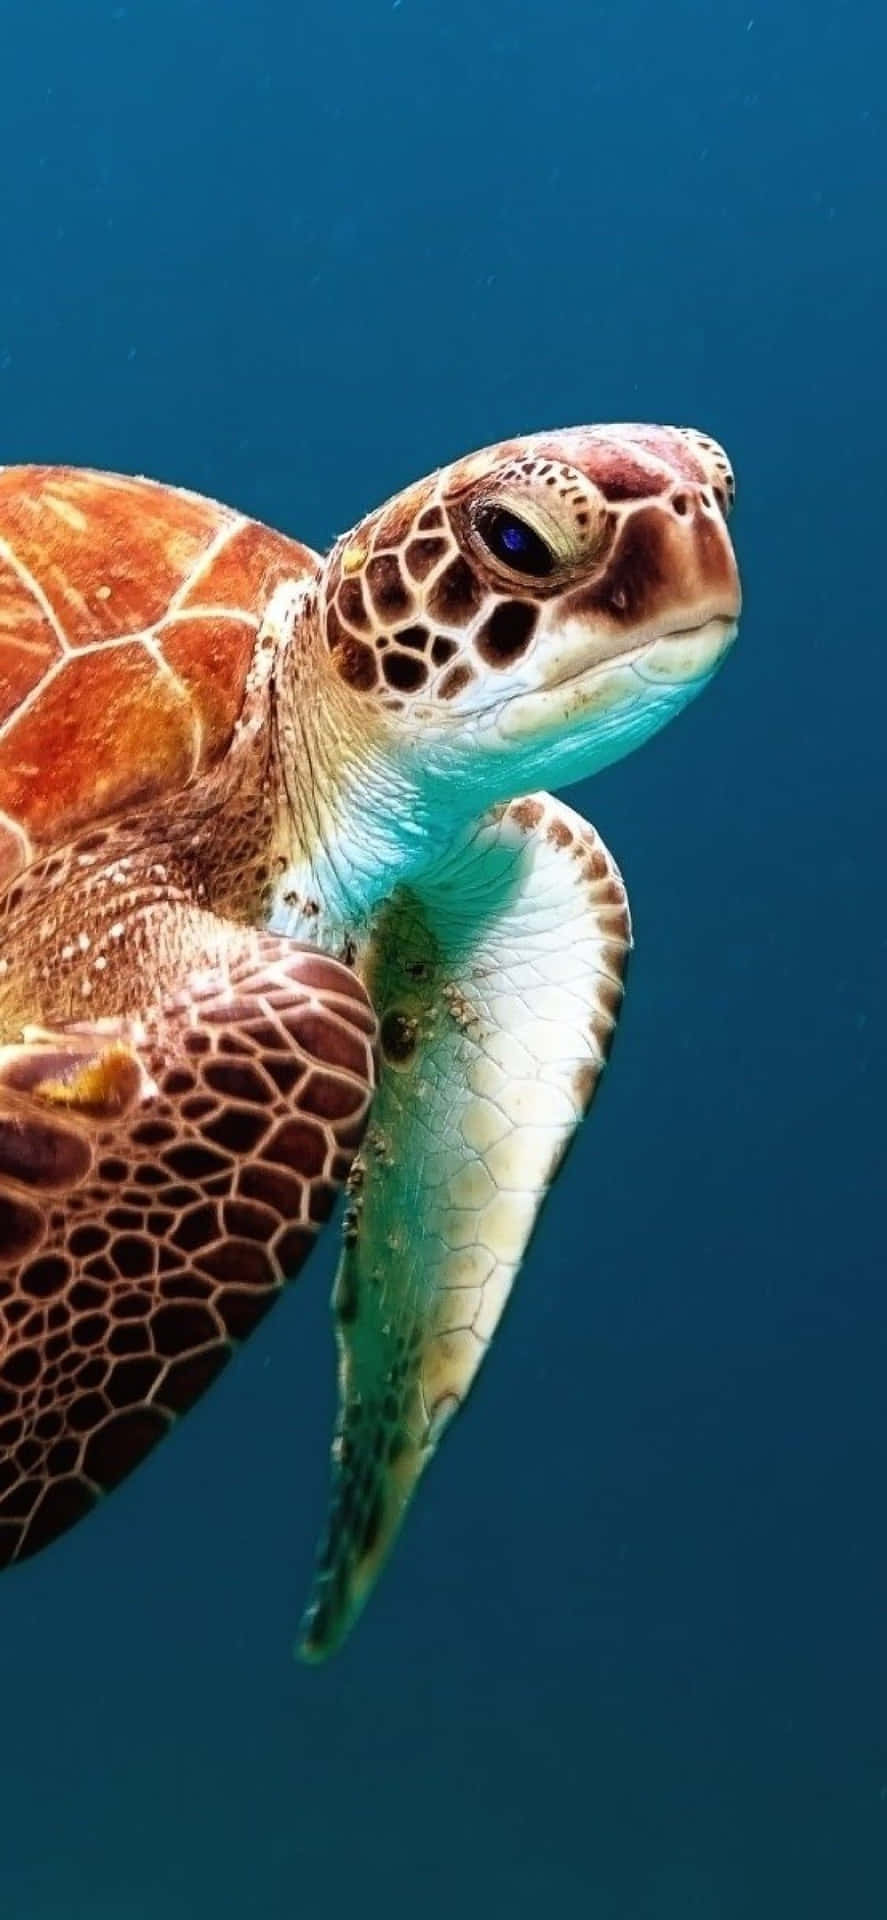 Discover a new underwater world with the Turtle Iphone HD Wallpaper